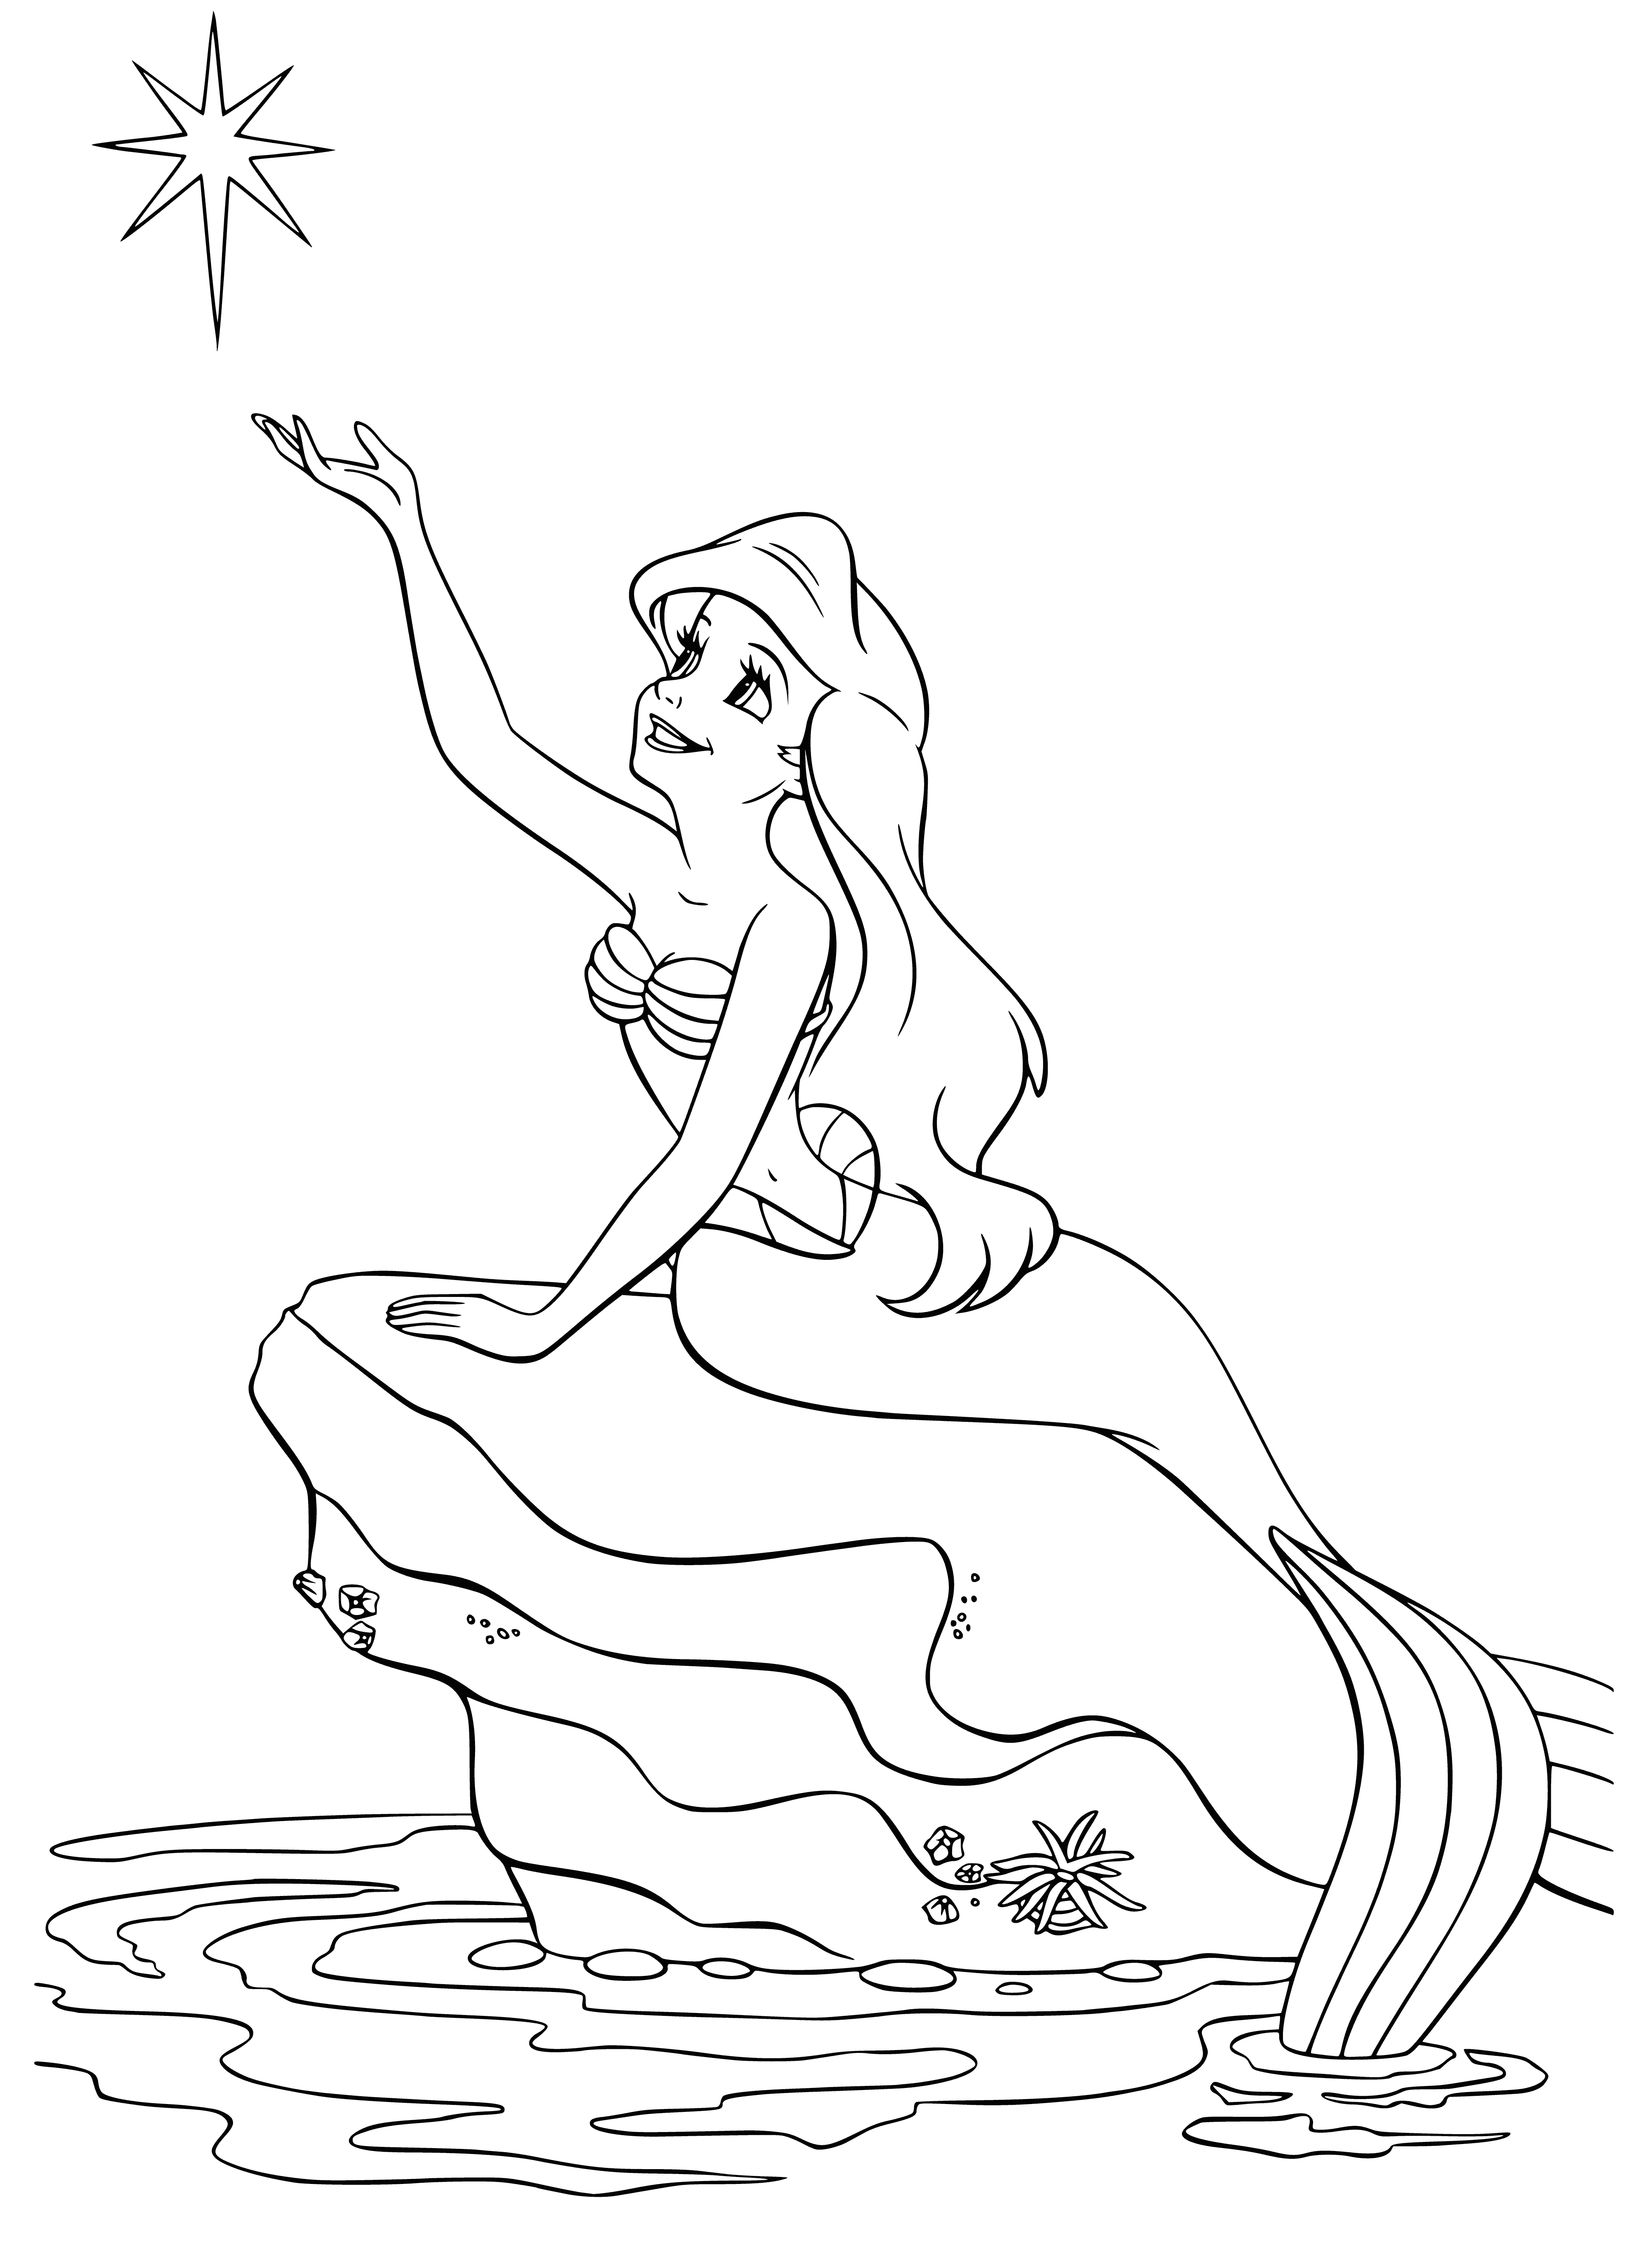 coloring page: Little mermaid swims on the surface of the sea, with long hair & a tail, gazing up to the sky. #thelittlemermaid